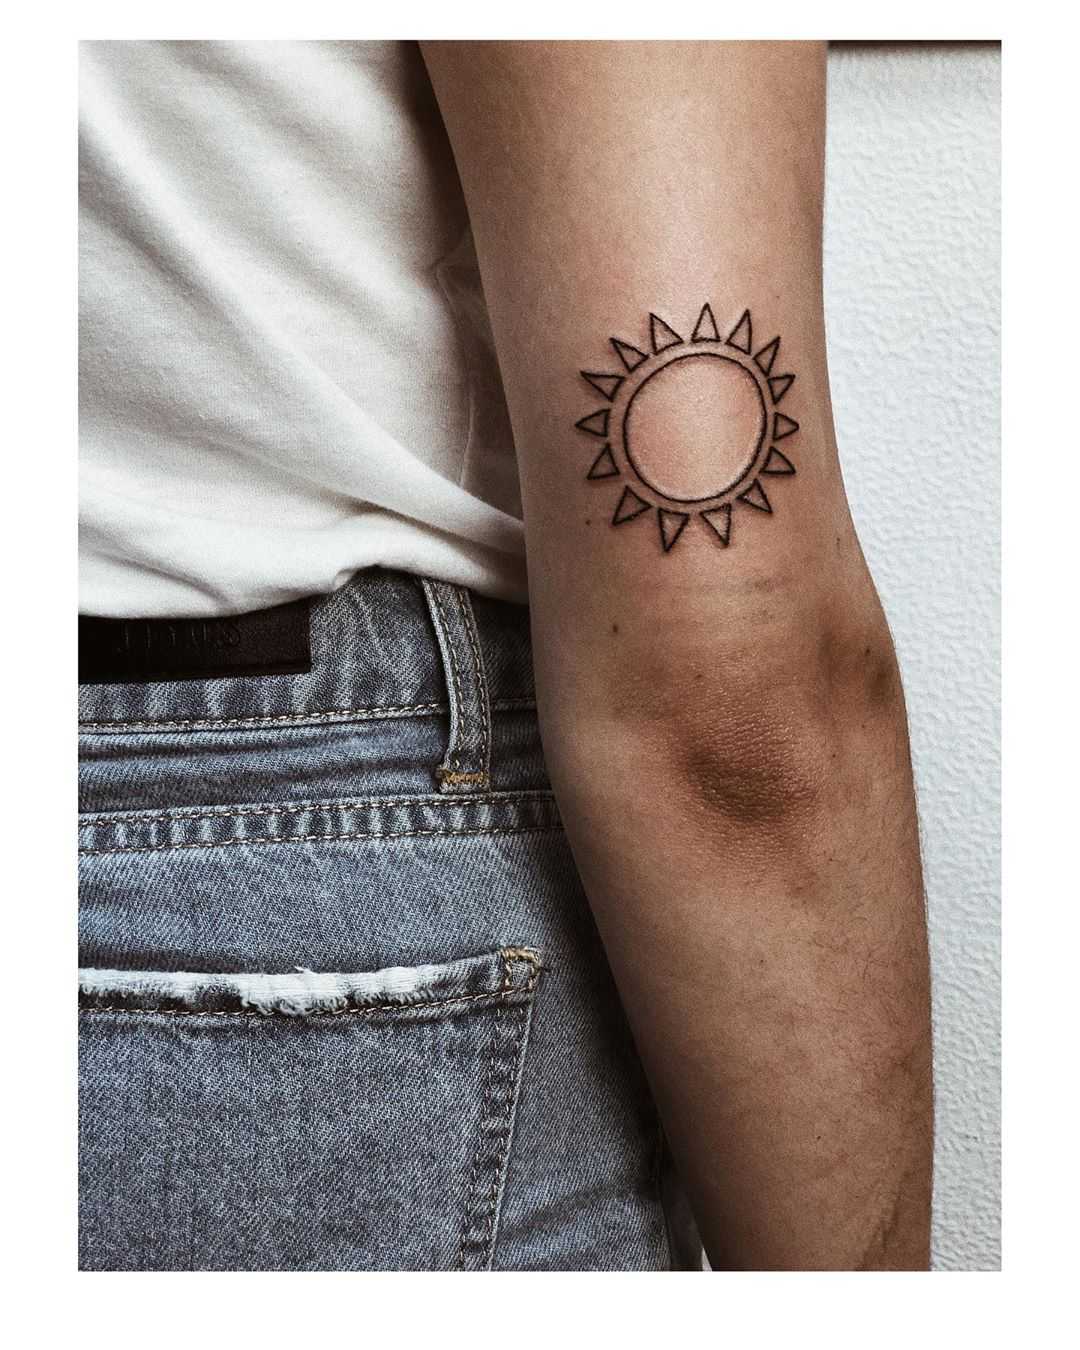 Sun on the arm by Tania Ost